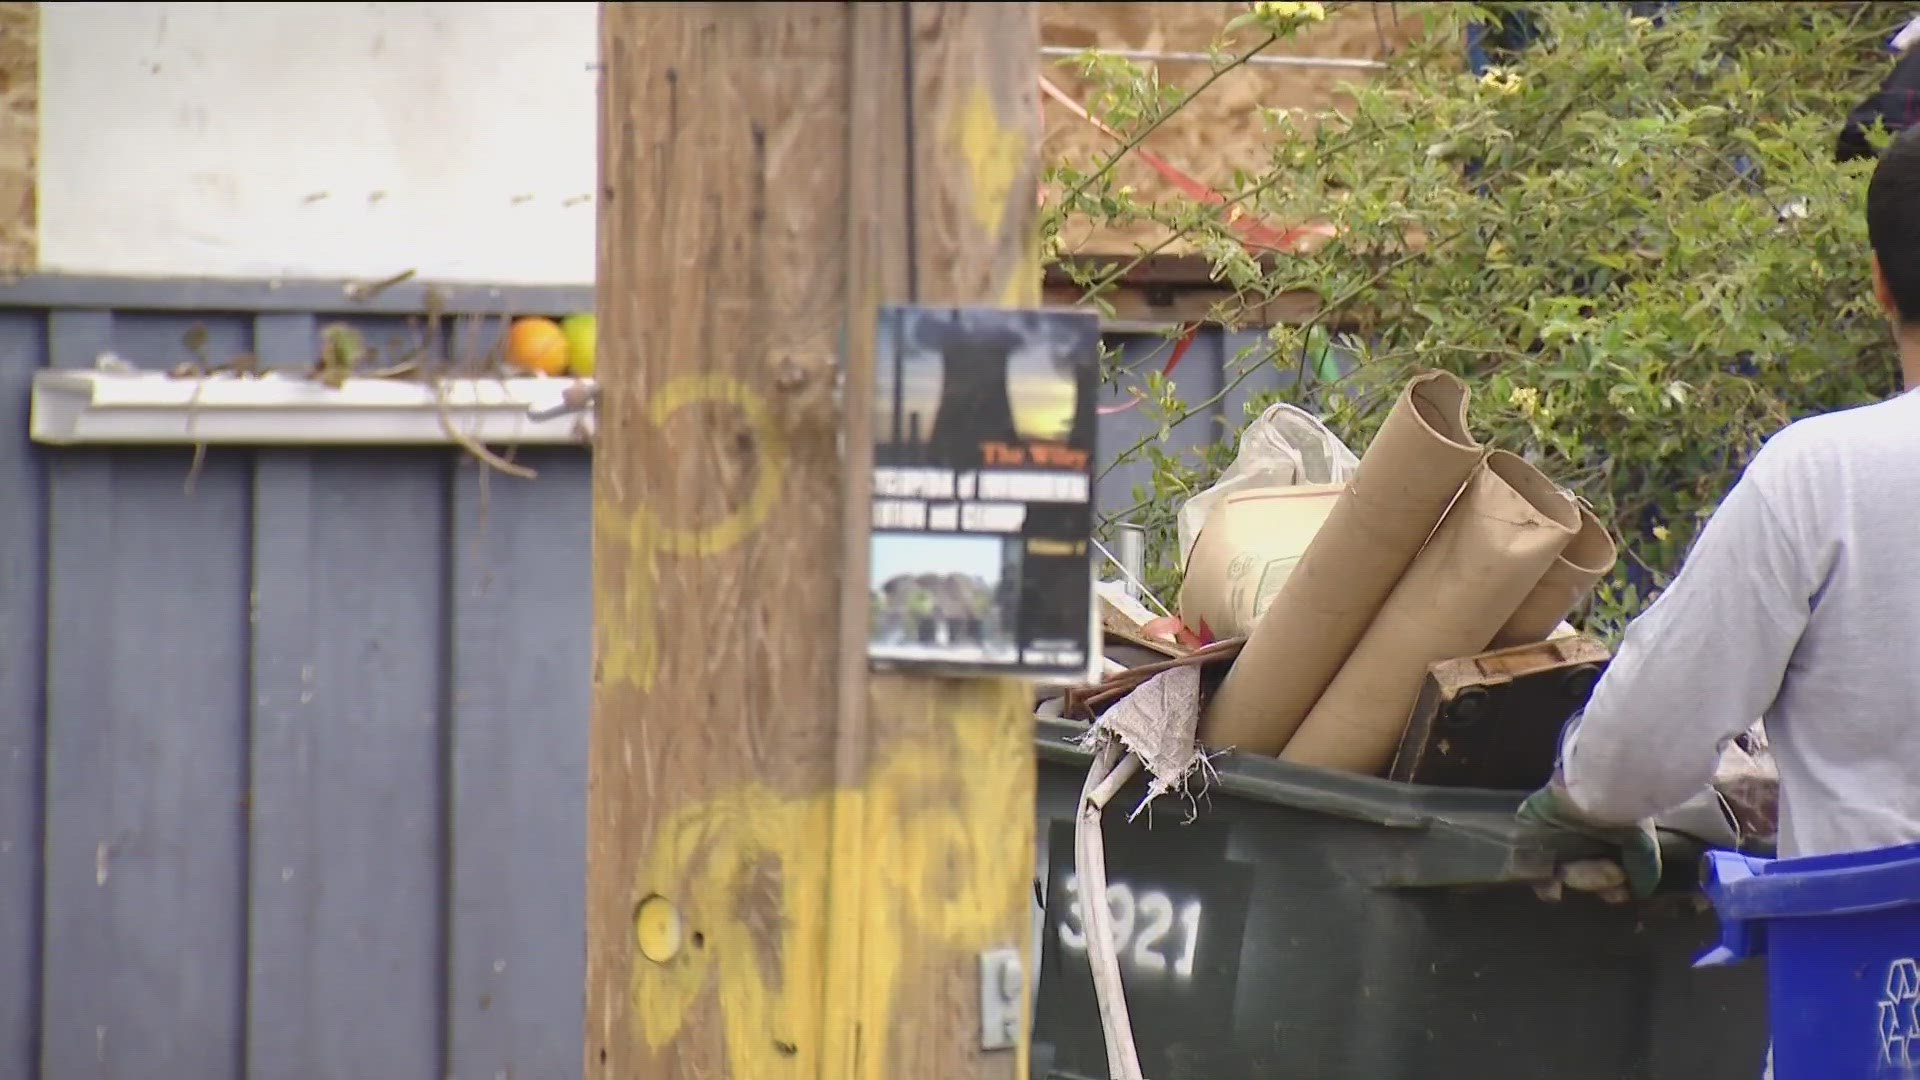 An update on the trash piling up at a City Heights home.